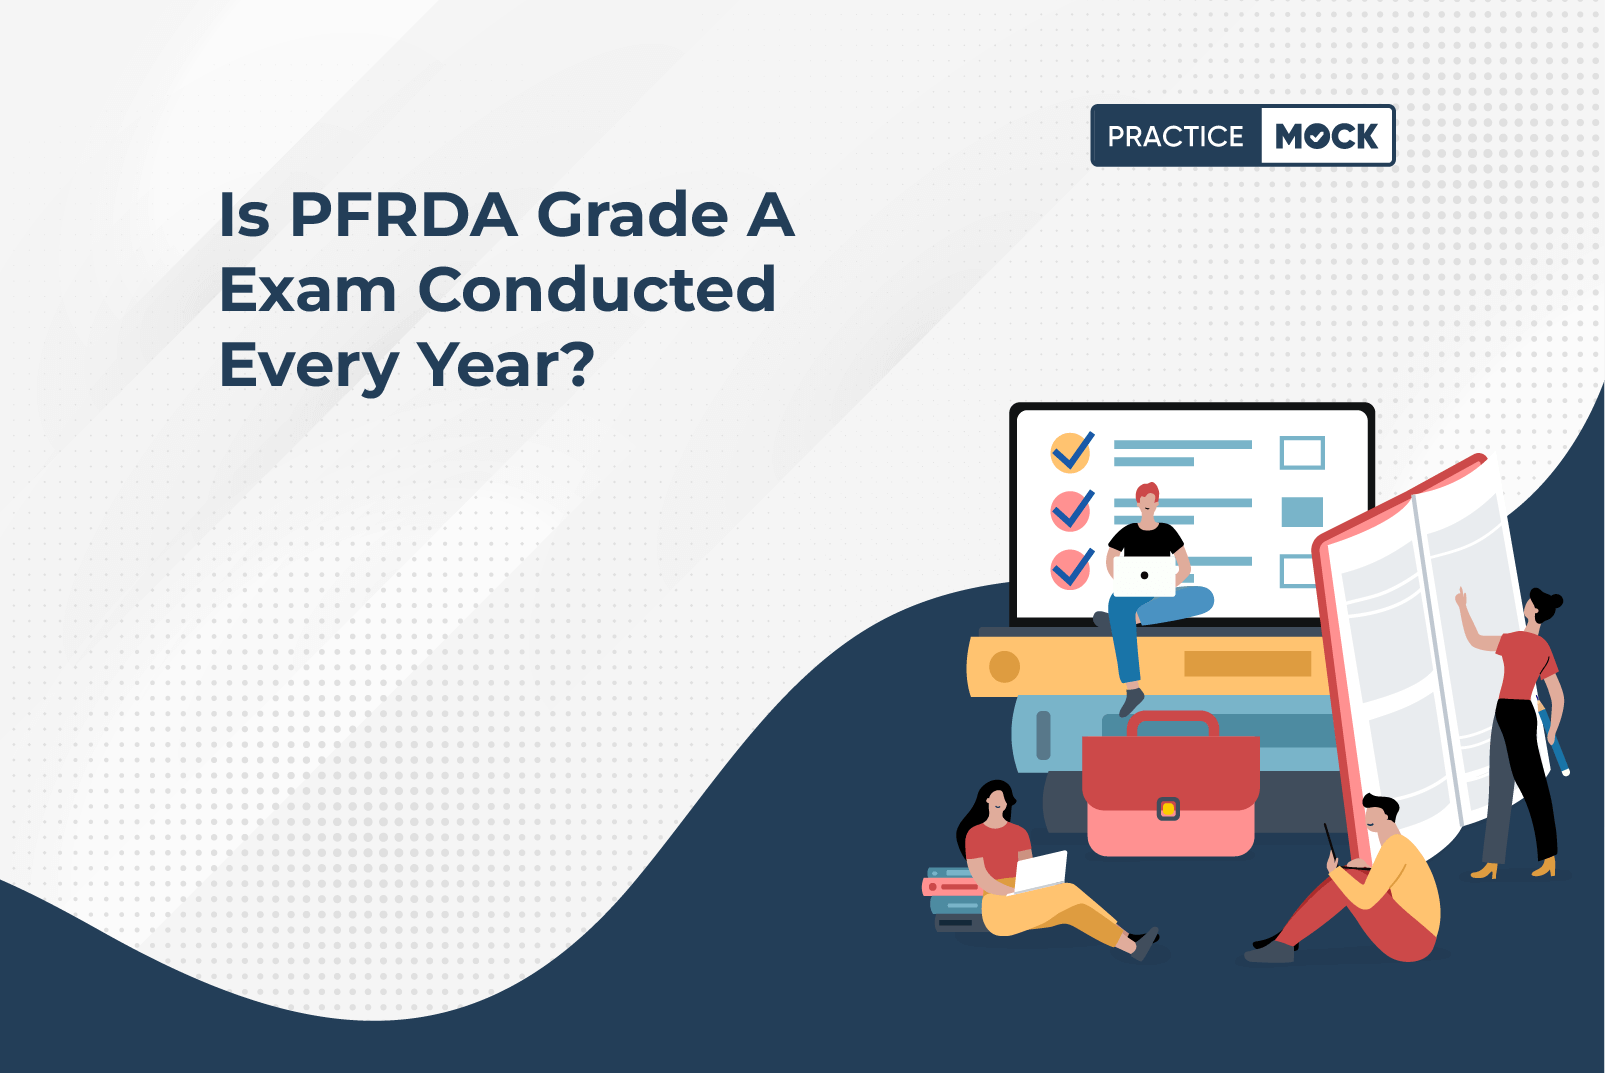 Is PFRDA Grade A Exam Conducted Every Year